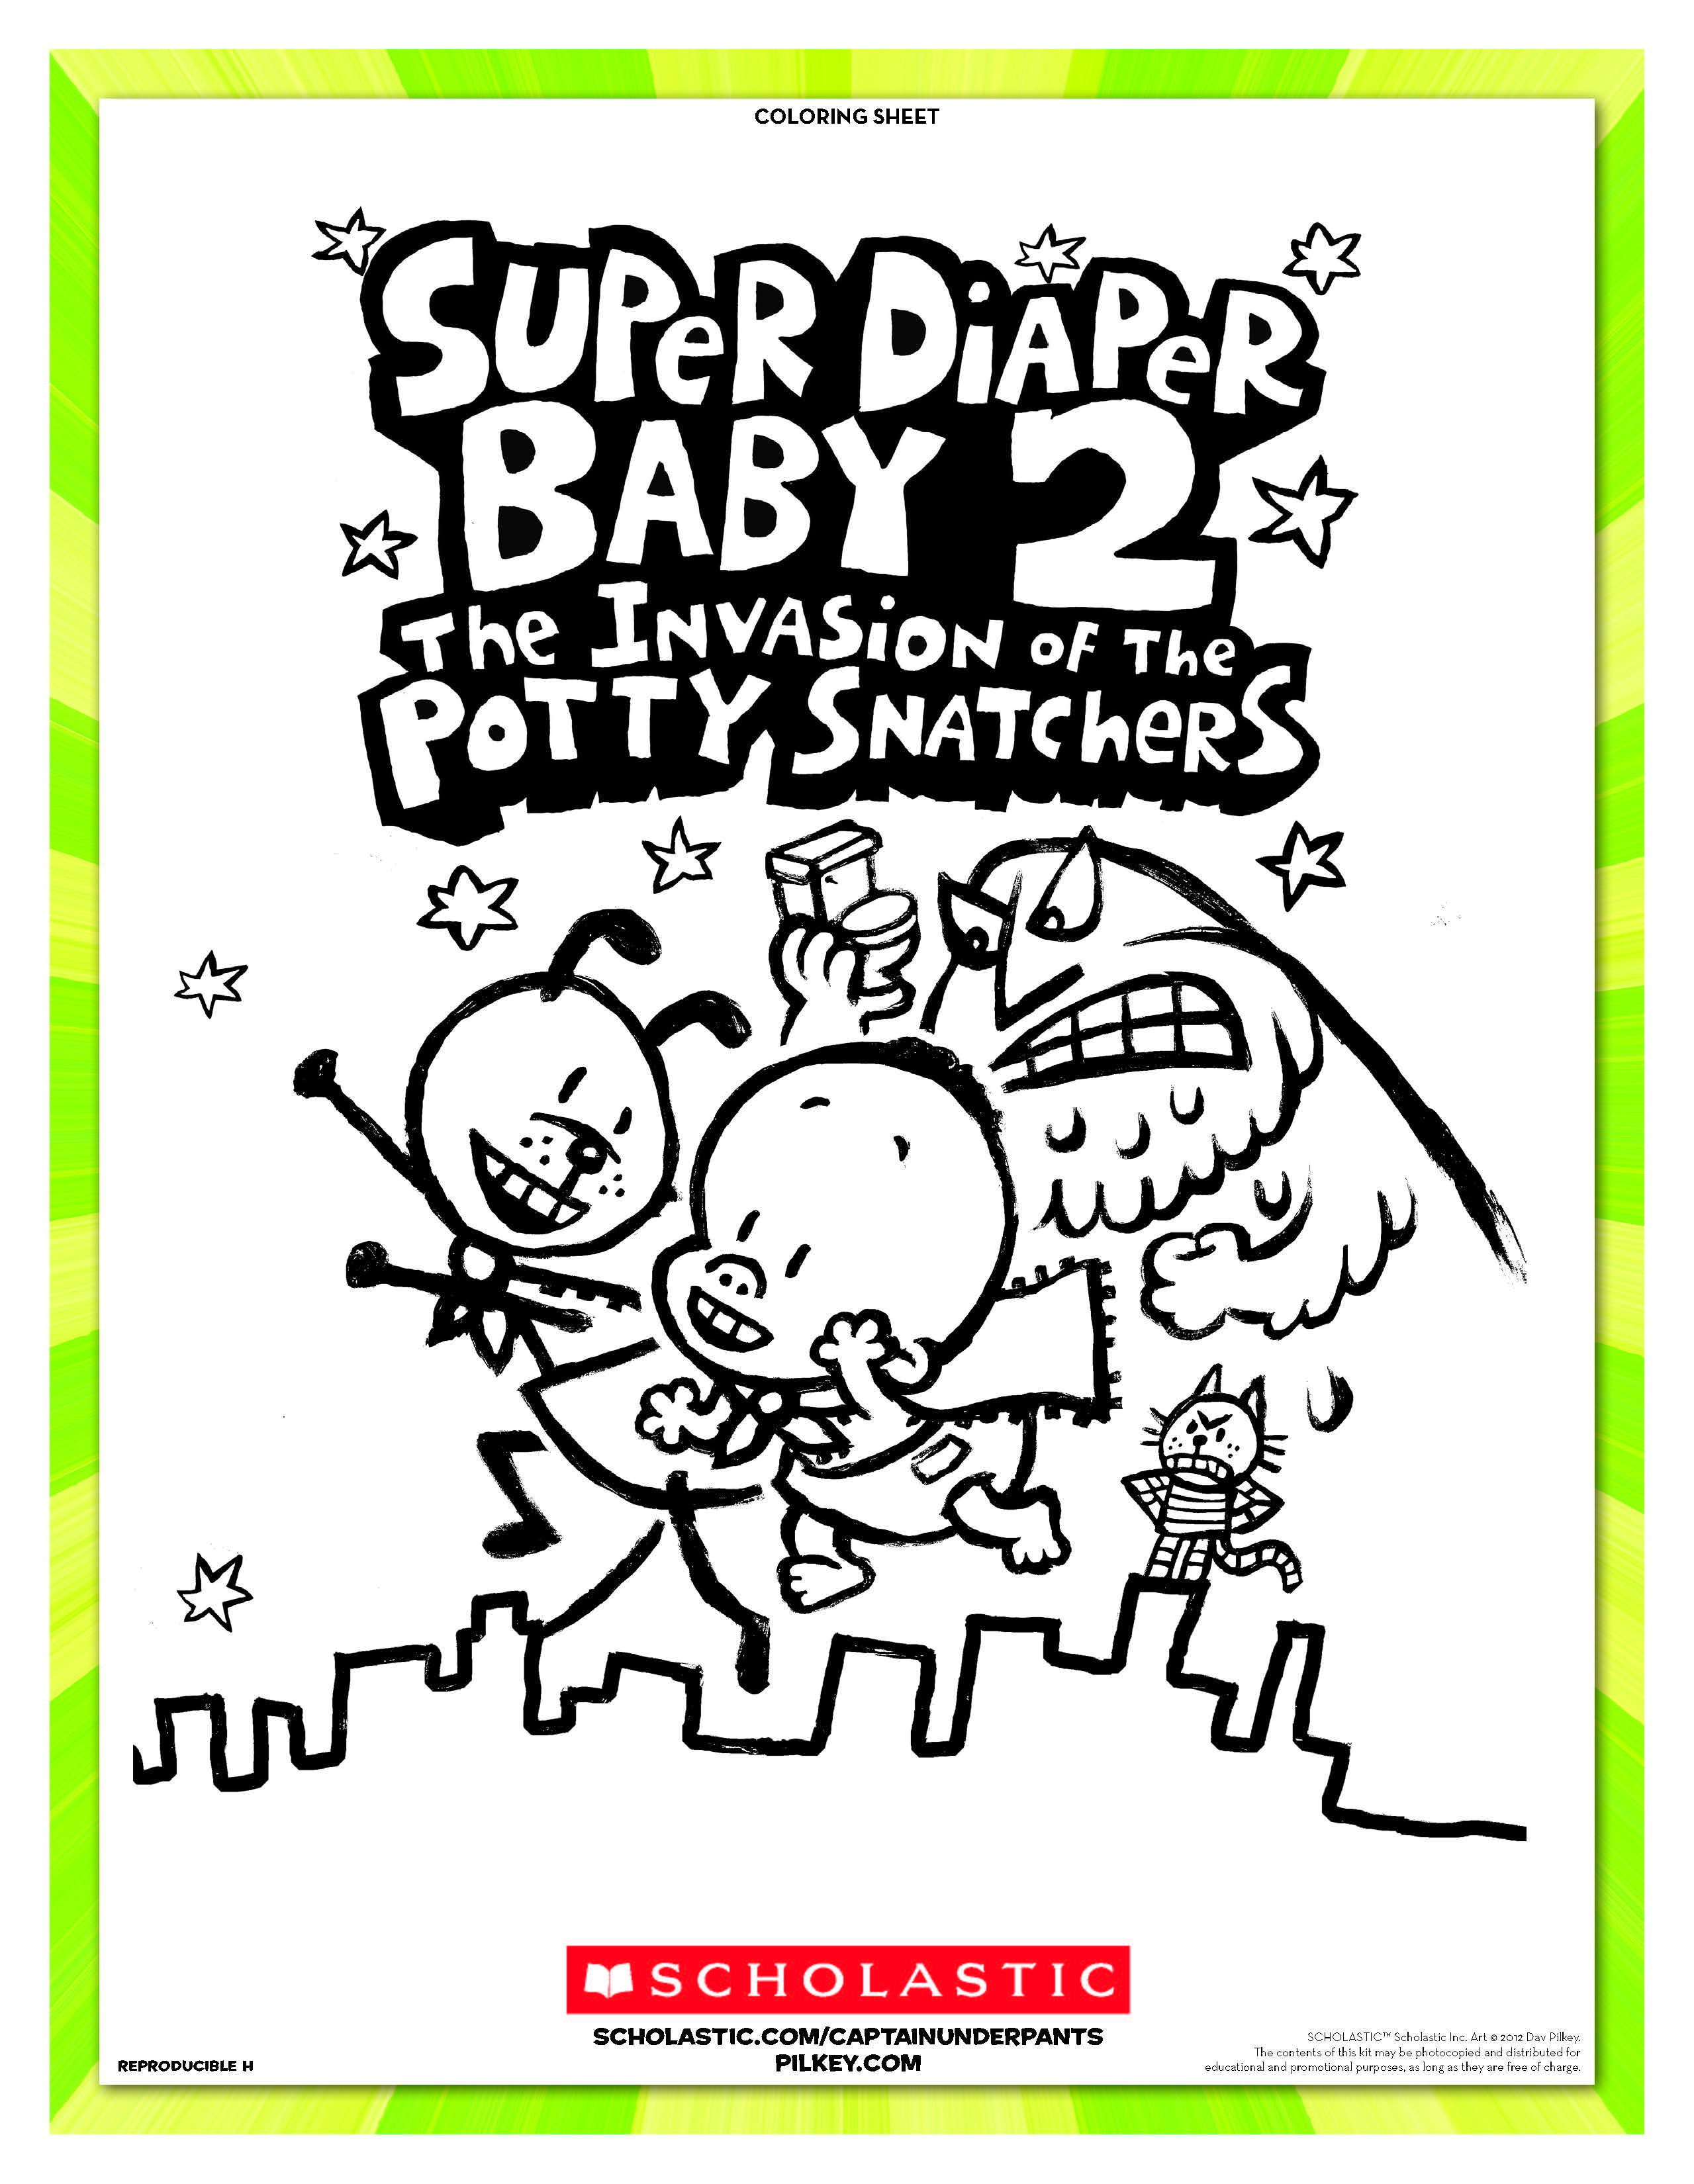 Super Diaper Baby 2: The Invasion of the Potty Snatchers coloring sheet